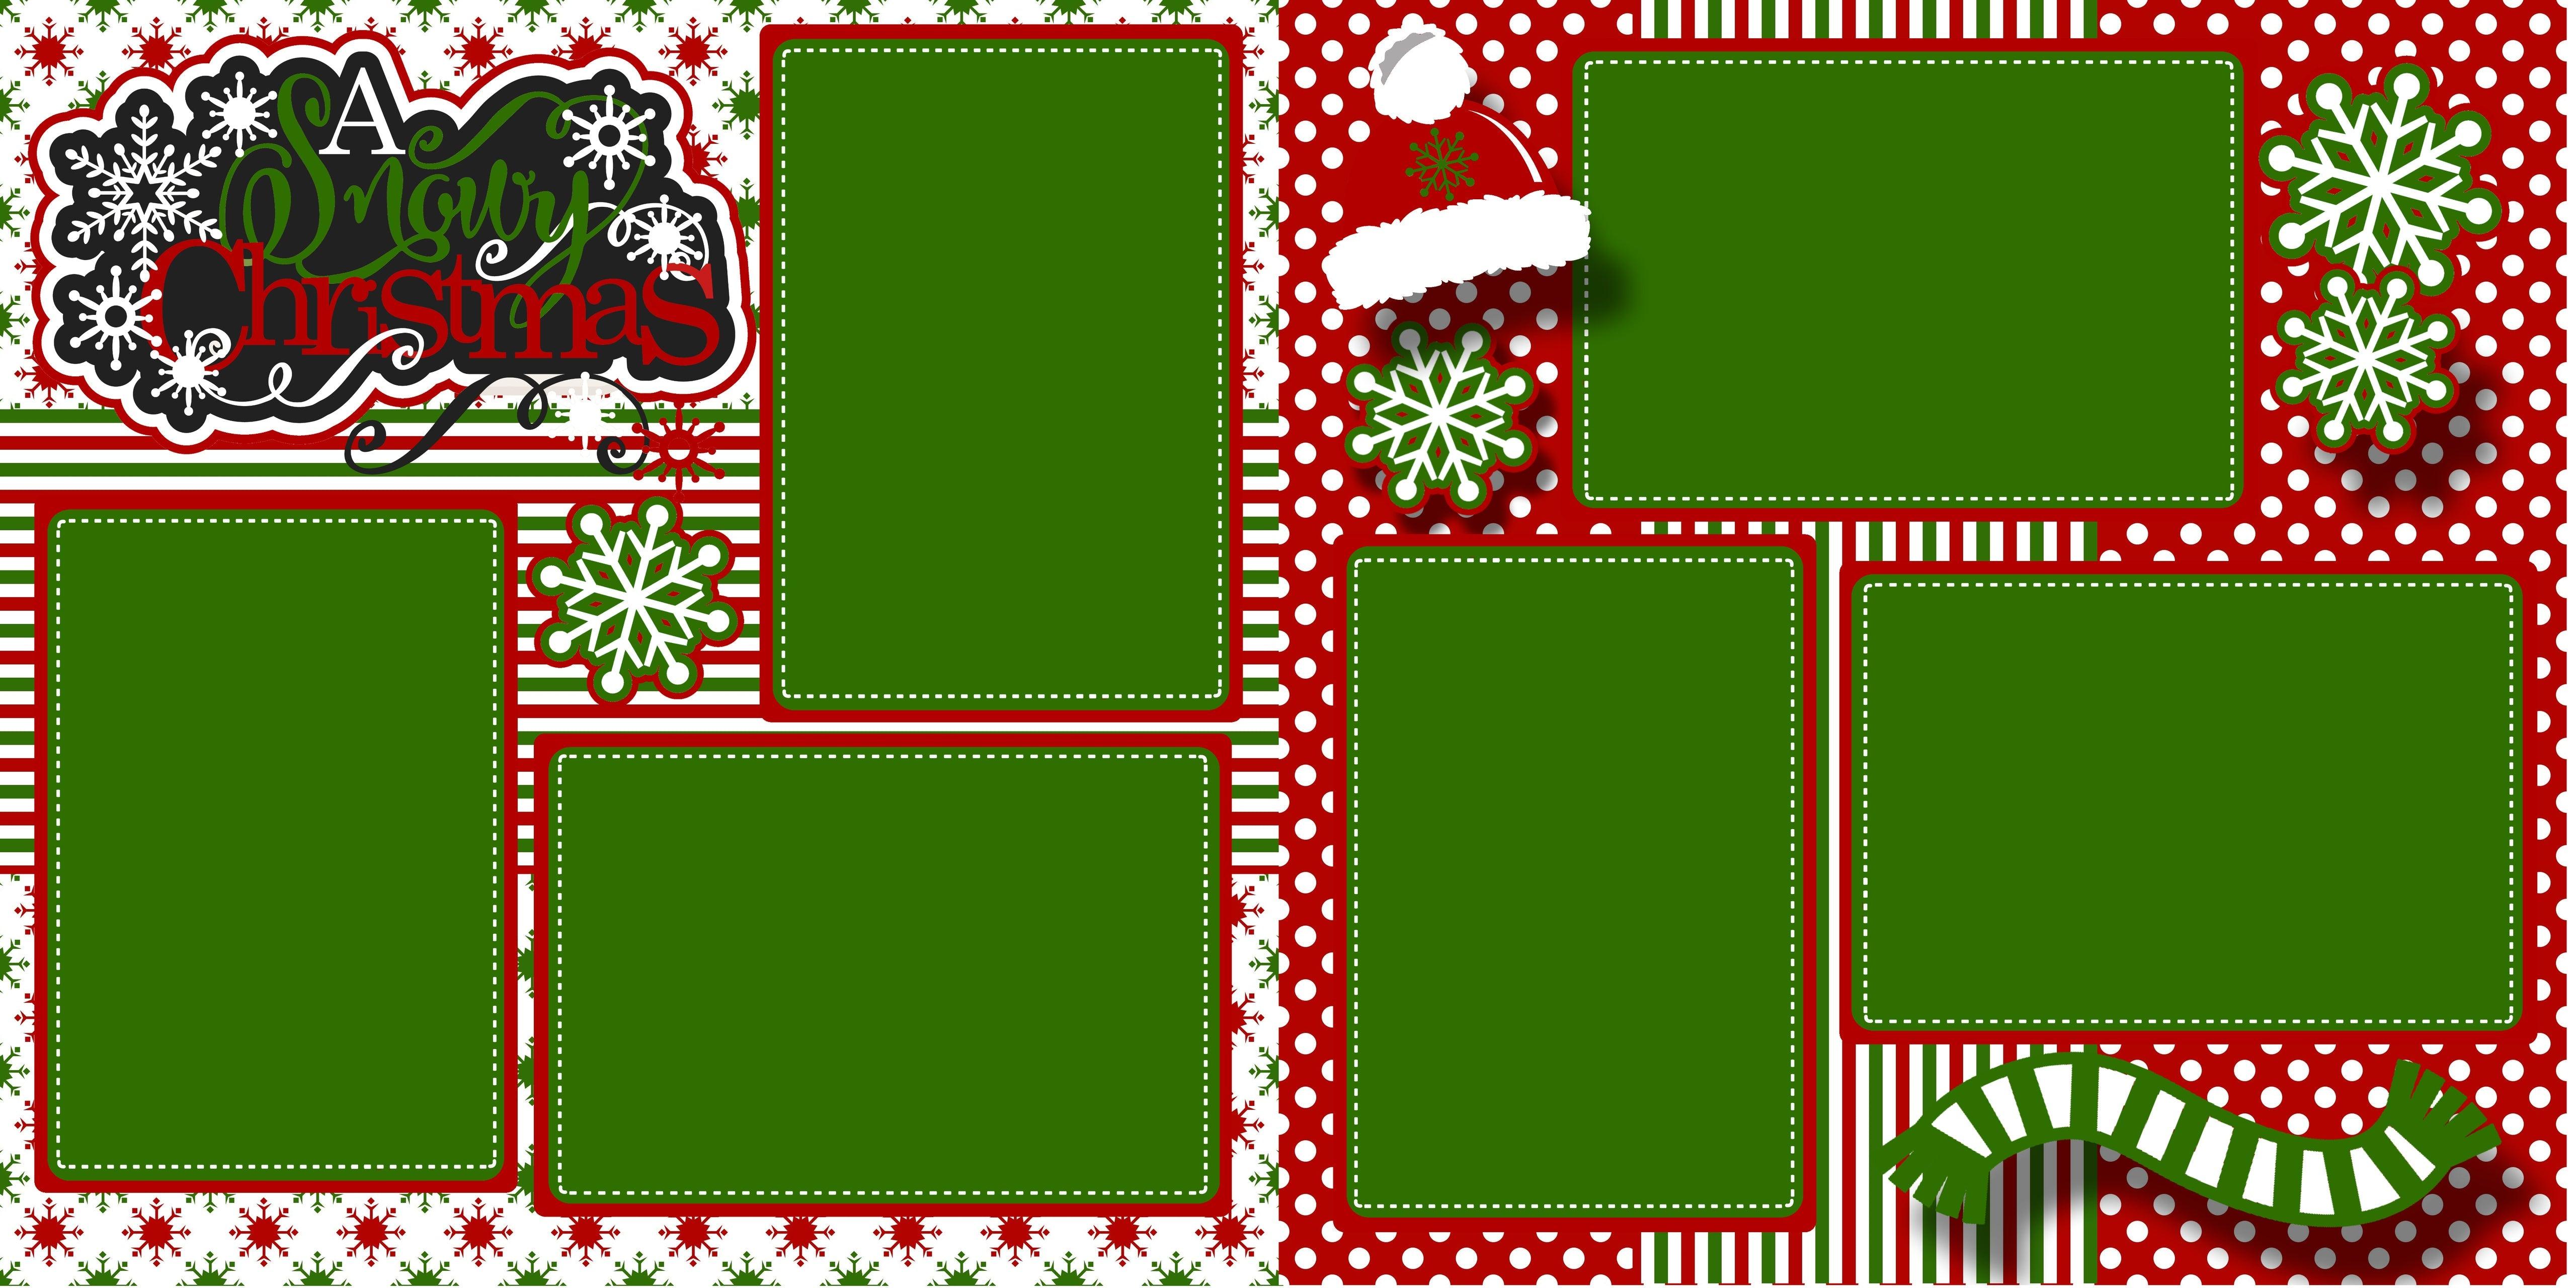 A Snowy Christmas (2) - 12 x 12 Premade, Printed Scrapbook Pages by SSC Designs